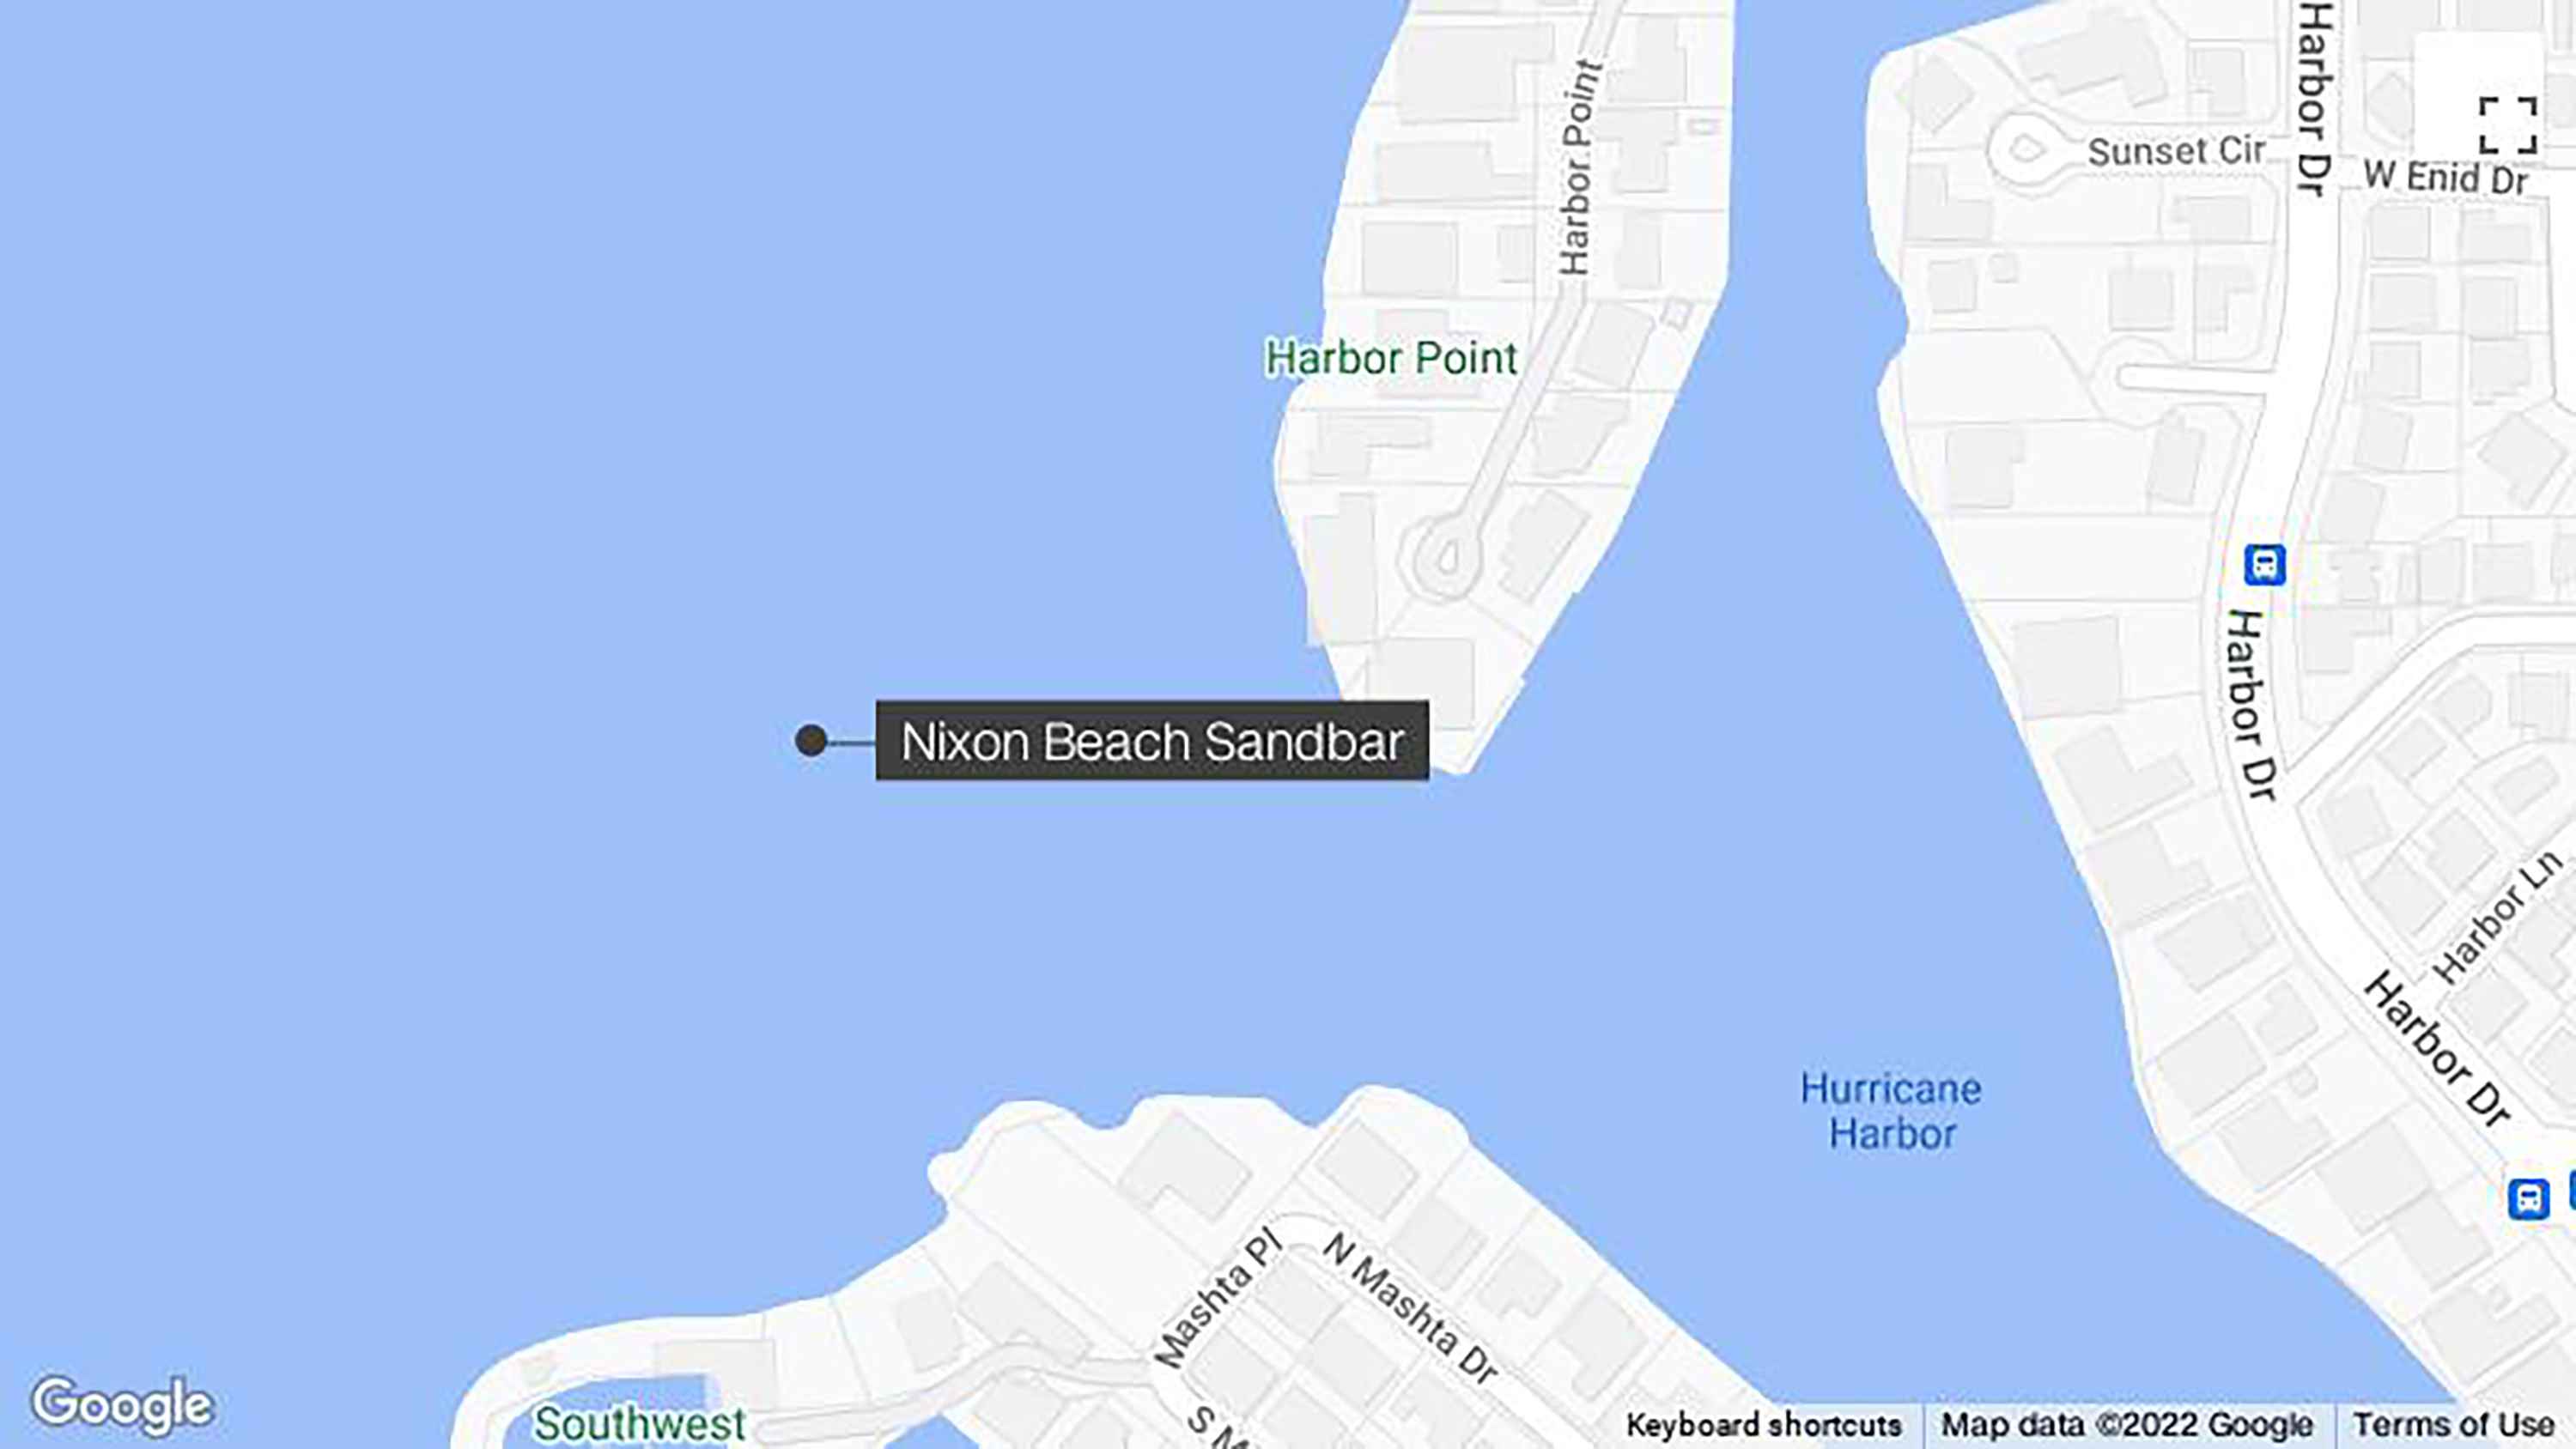 One Person Missing And 10 Transported To Hospitals After A Boat Collision In Florida – CBS Tampa